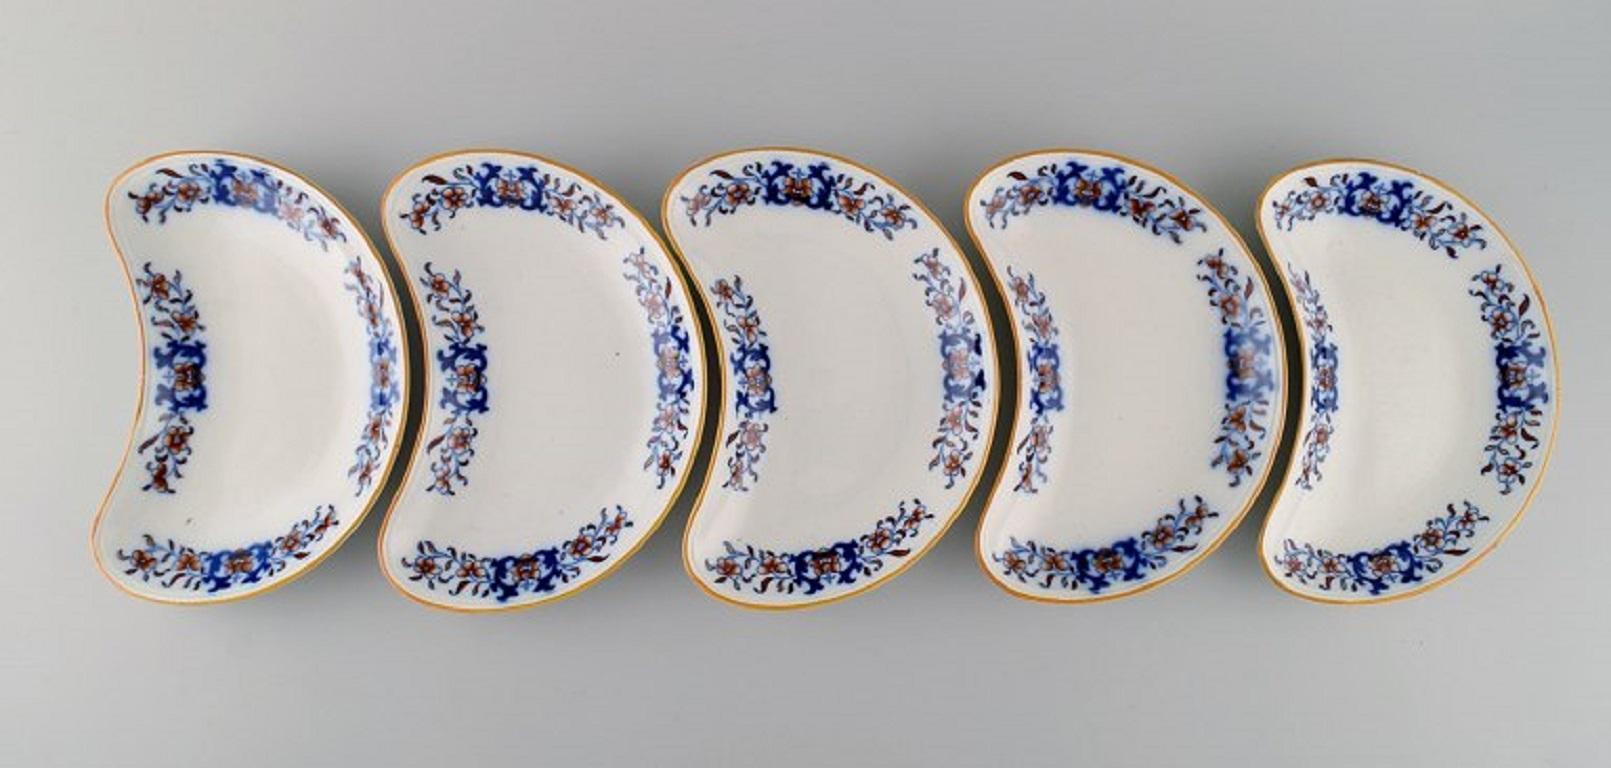 Mintons, England. Five antique bowls in hand-painted faience. Chinese style, early 20th century.
Measures: 21 x 13 cm.
In excellent condition.
Stamped.